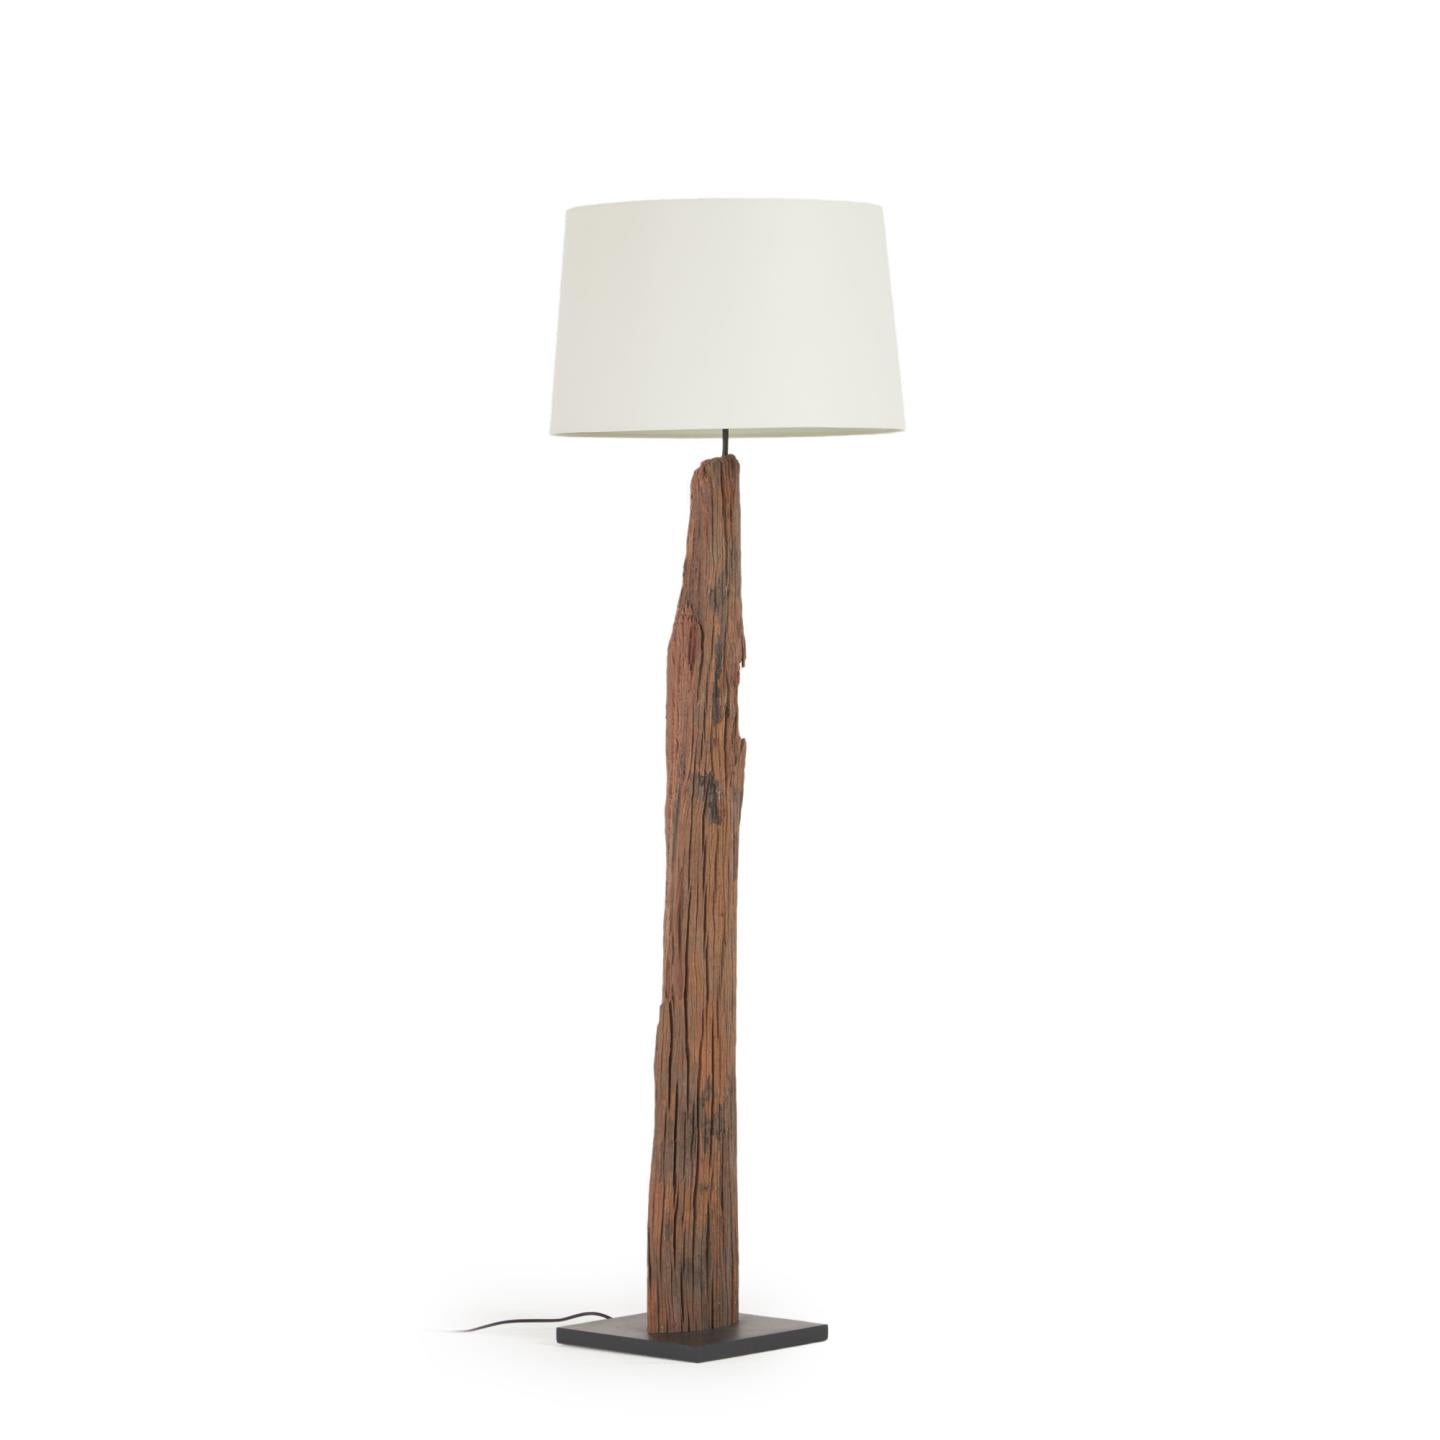 Powell floor lamp made of recycled wood